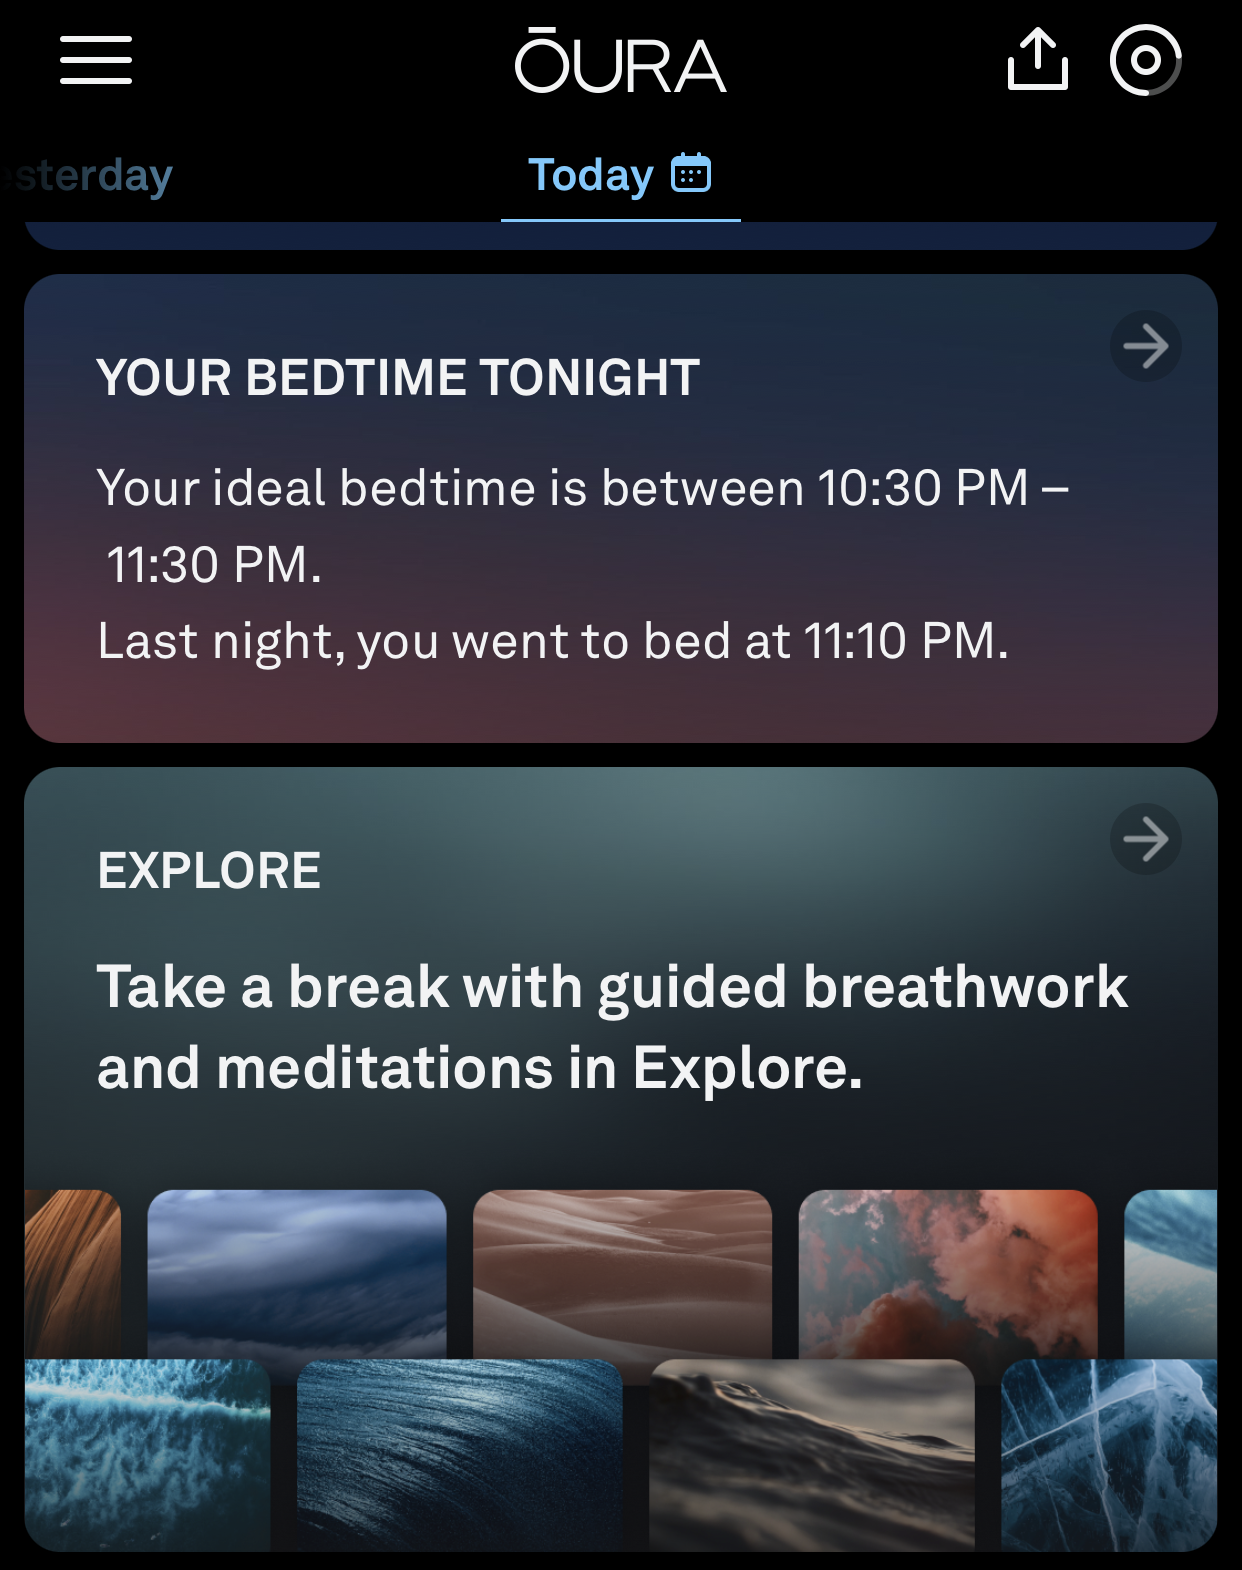 collapsed version of the bedtime guidance card on the home screen